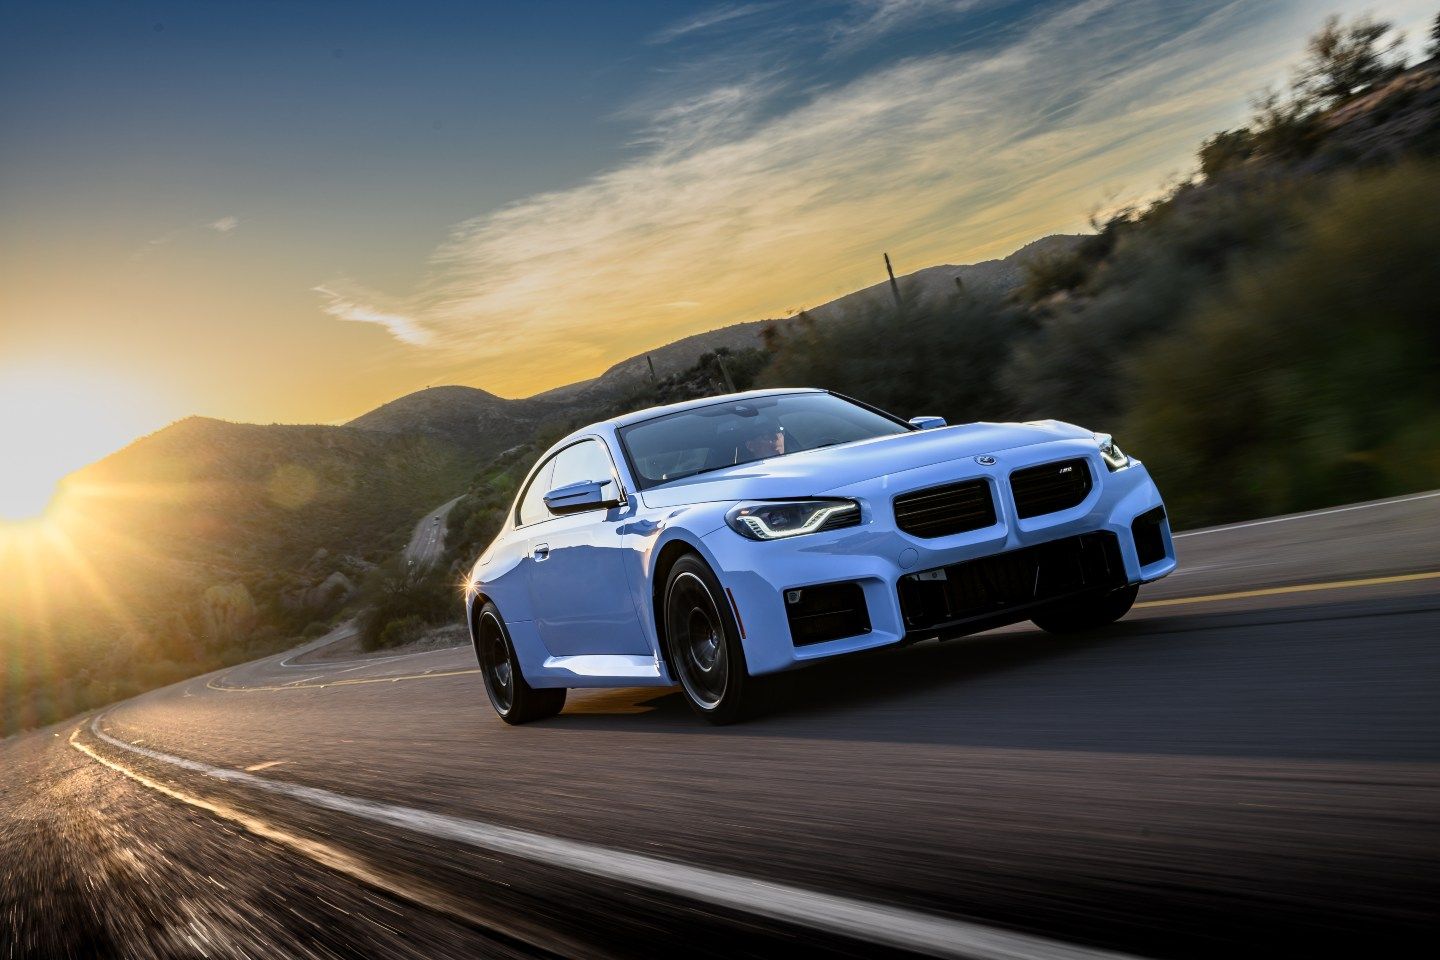 2023 BMW M4 CSL First Drive Review: So Good It Almost Made Me Throw Up